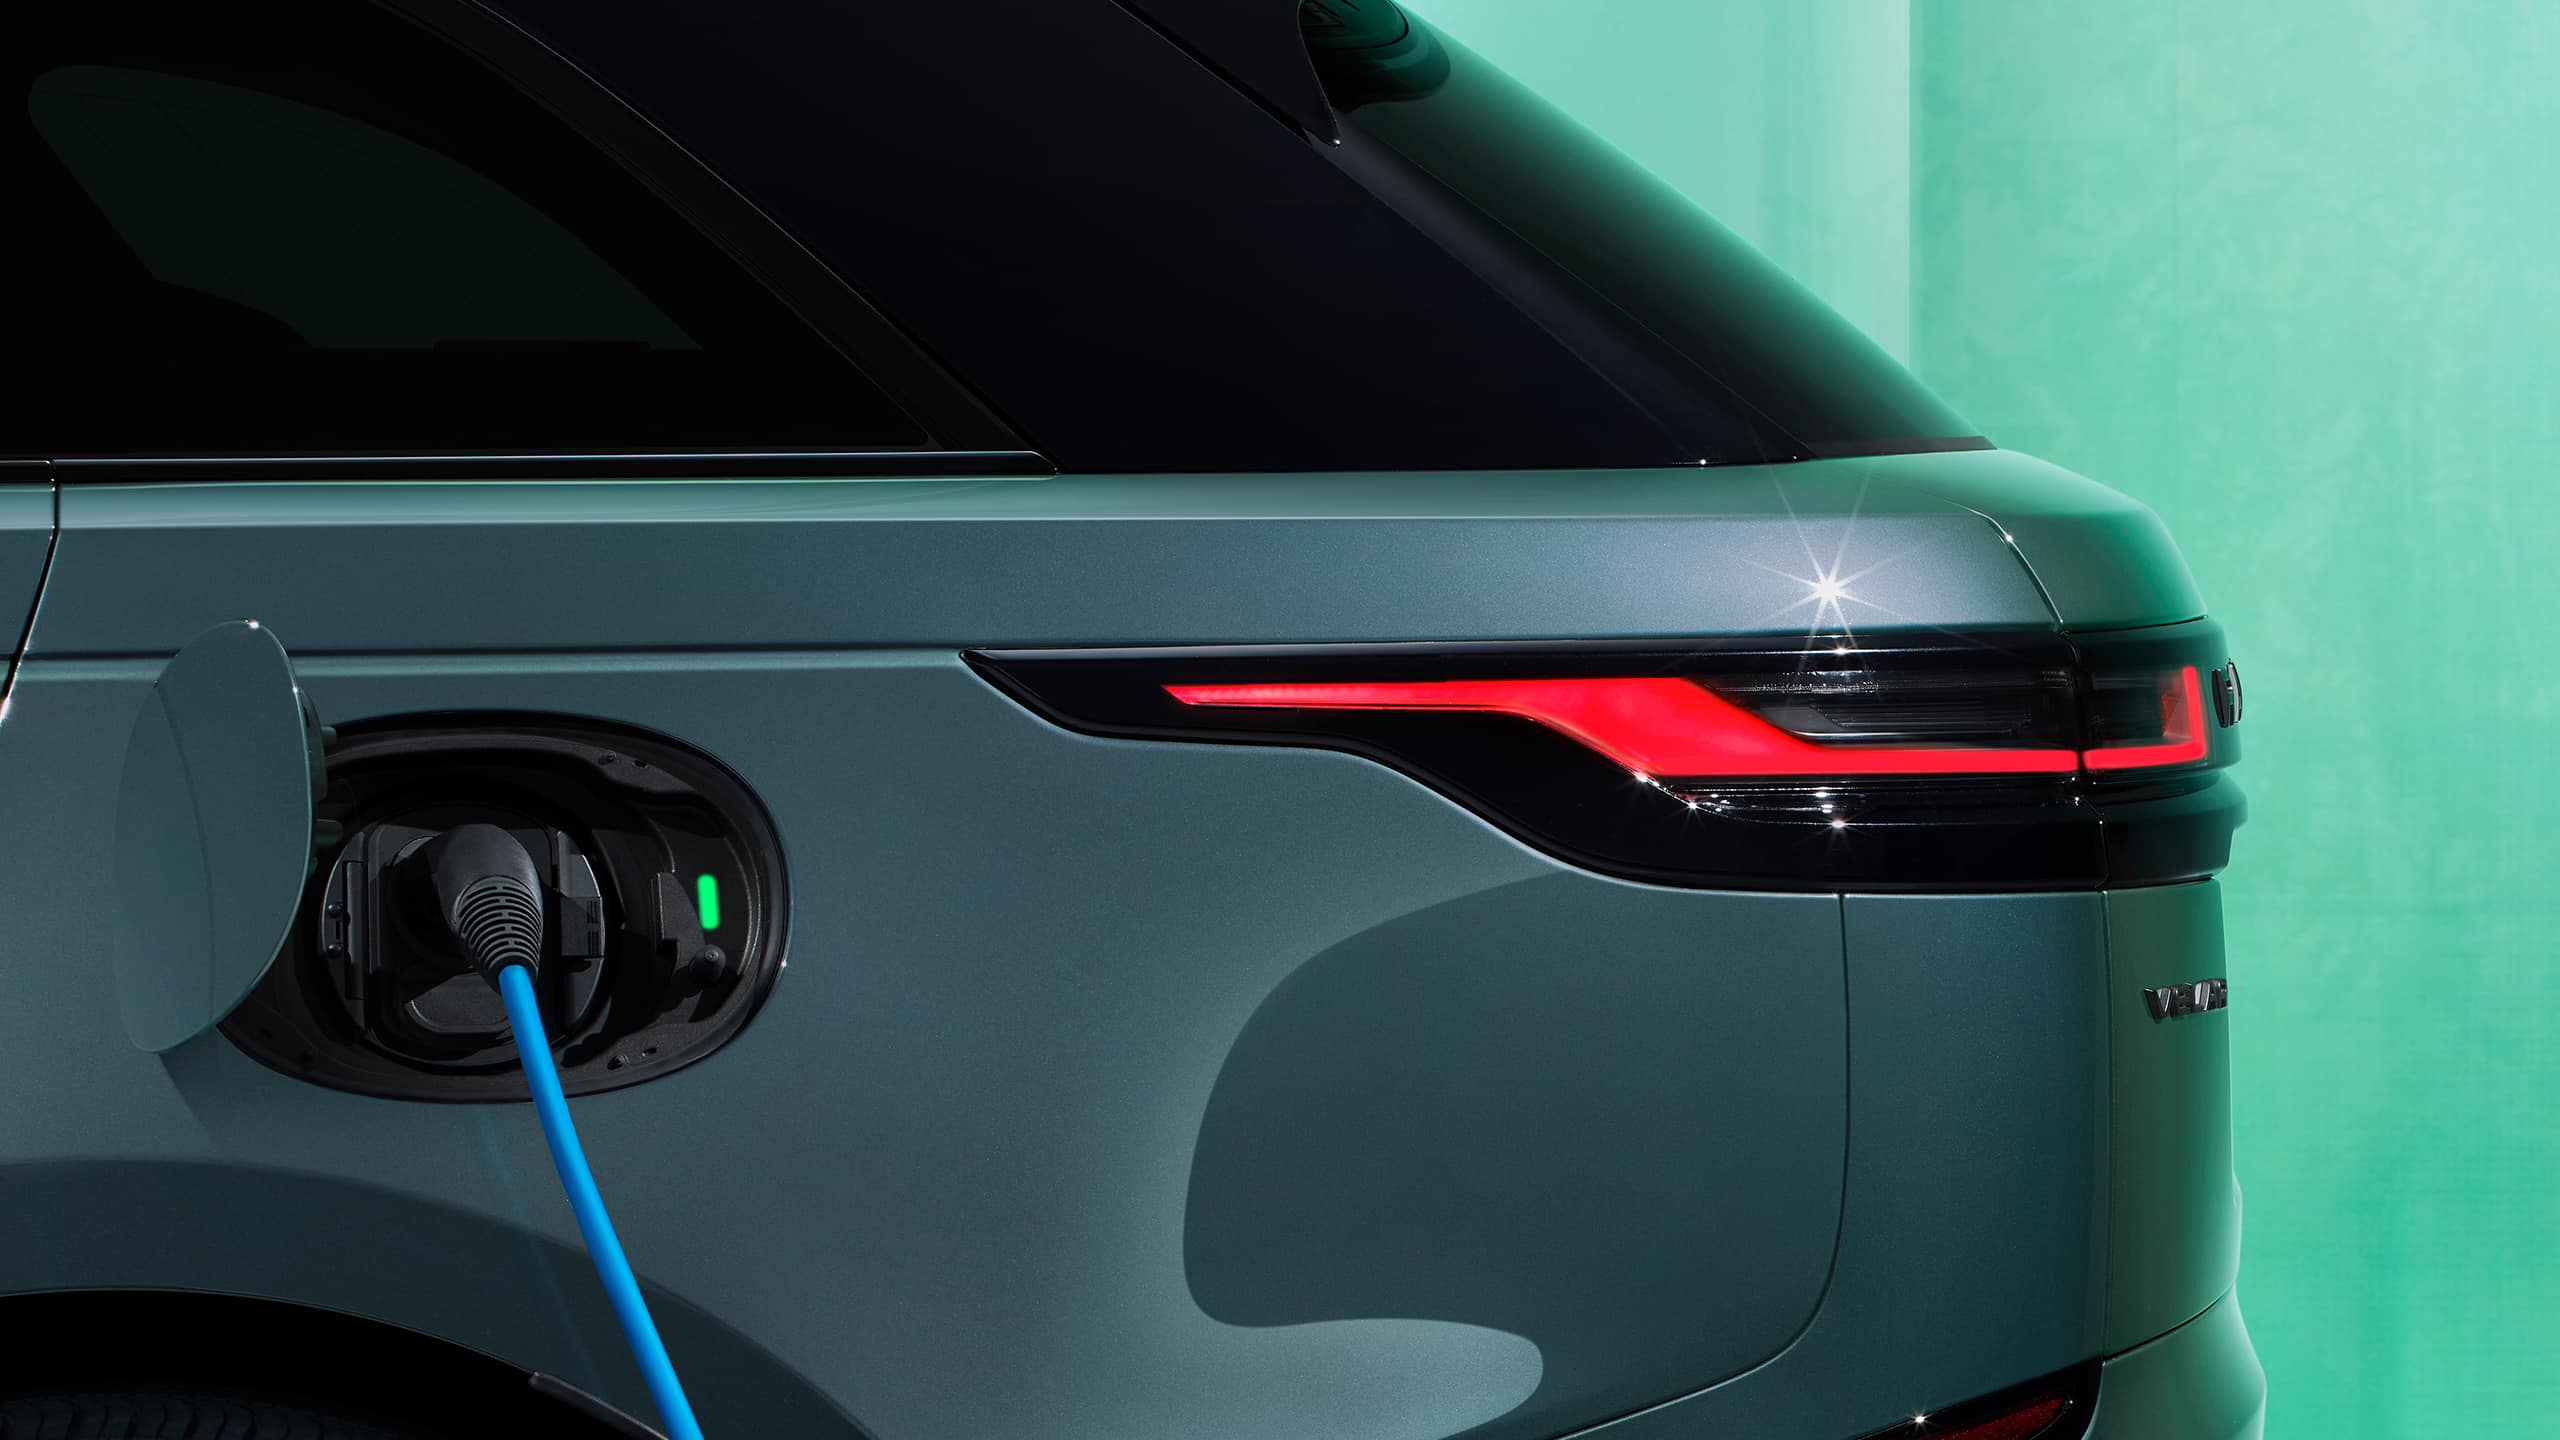 Range Rover Velar with its charging cable plugged in.